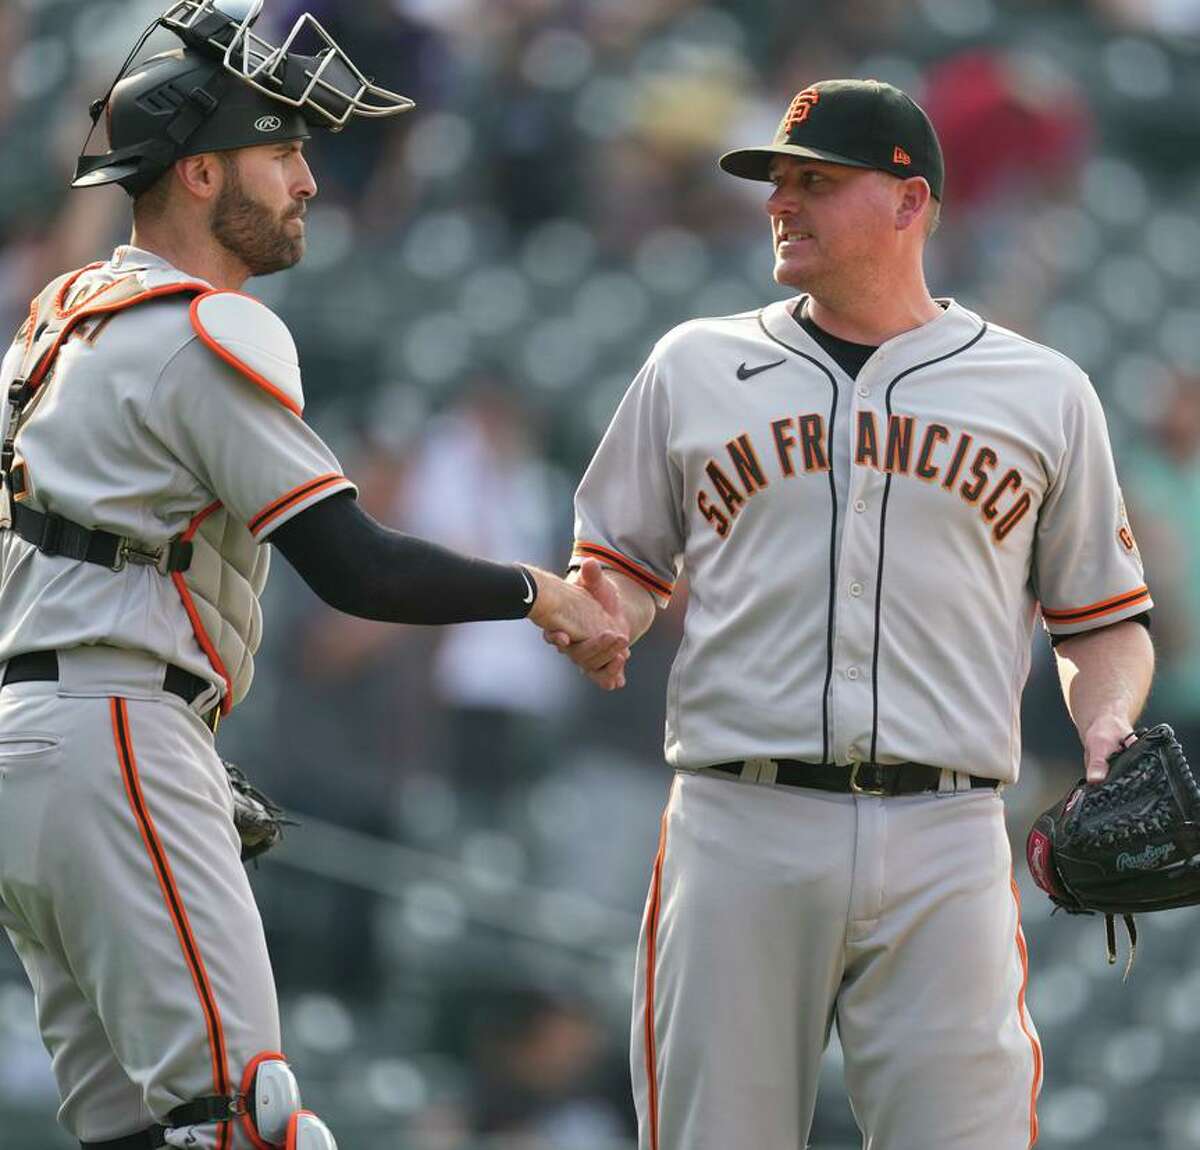 San Francisco Giants catcher Curt Casali, left, congratulates relief pitcher Jake McGee after the team's baseball game against the Colorado Rockies on Wednesday, Sept. 8, 2021, in Denver. The Giants won 7-4. (AP Photo/David Zalubowski)